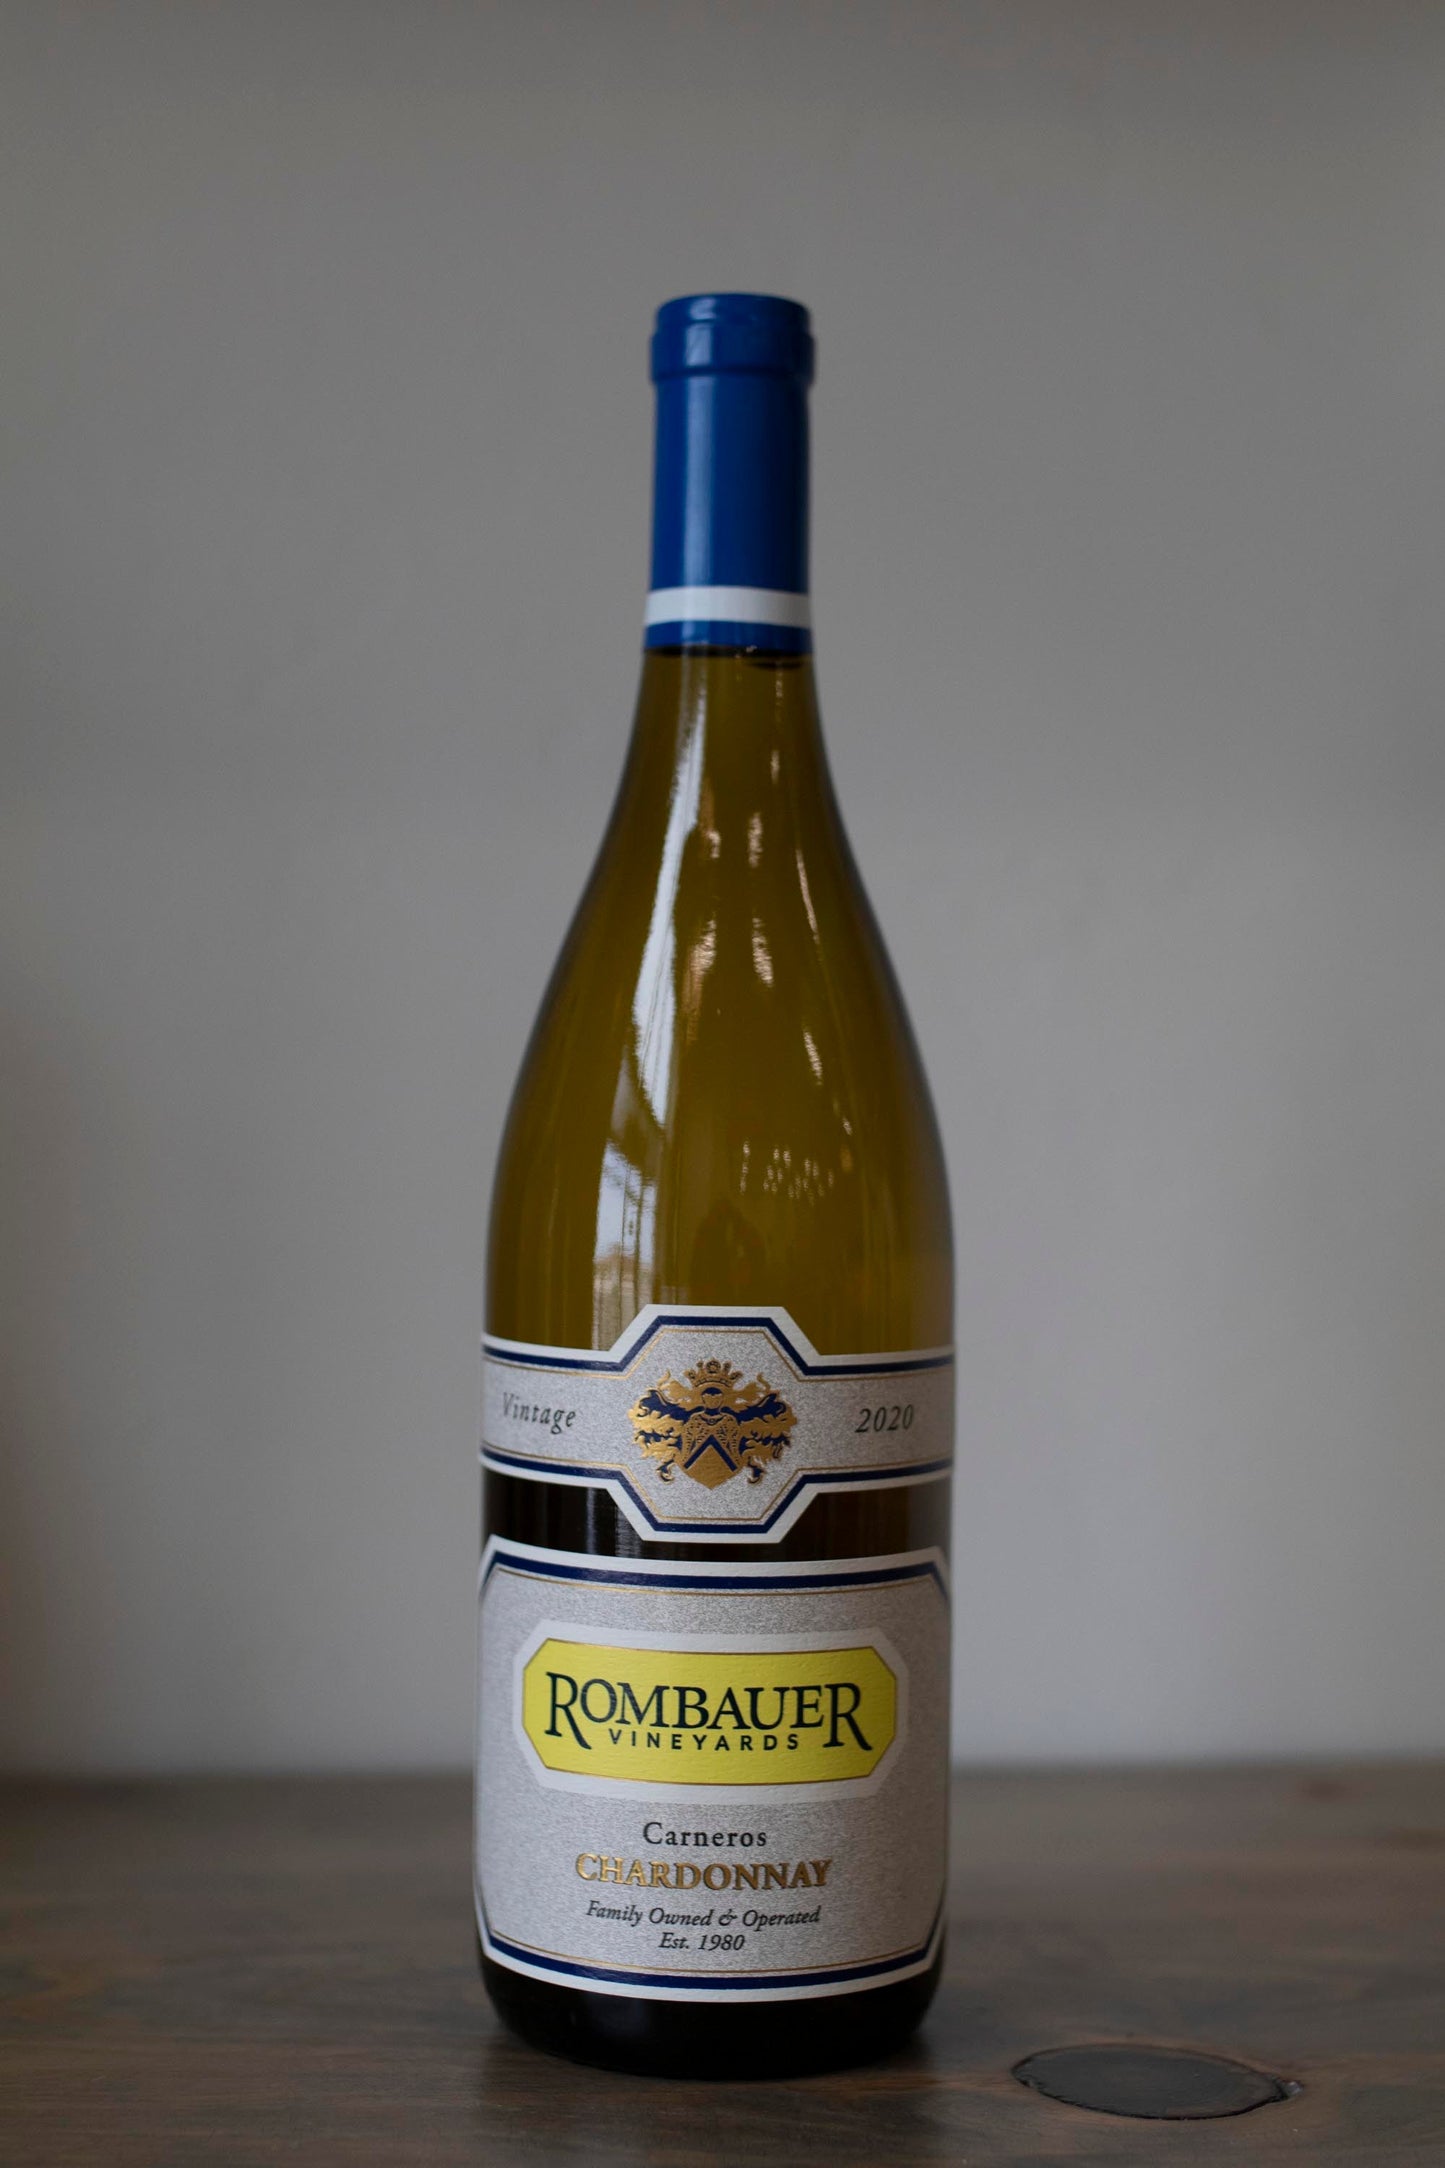 Bottle of Rombauer chard found at Vine & Board in 3809 NW 166th St Suite 1, Edmond, OK 73012